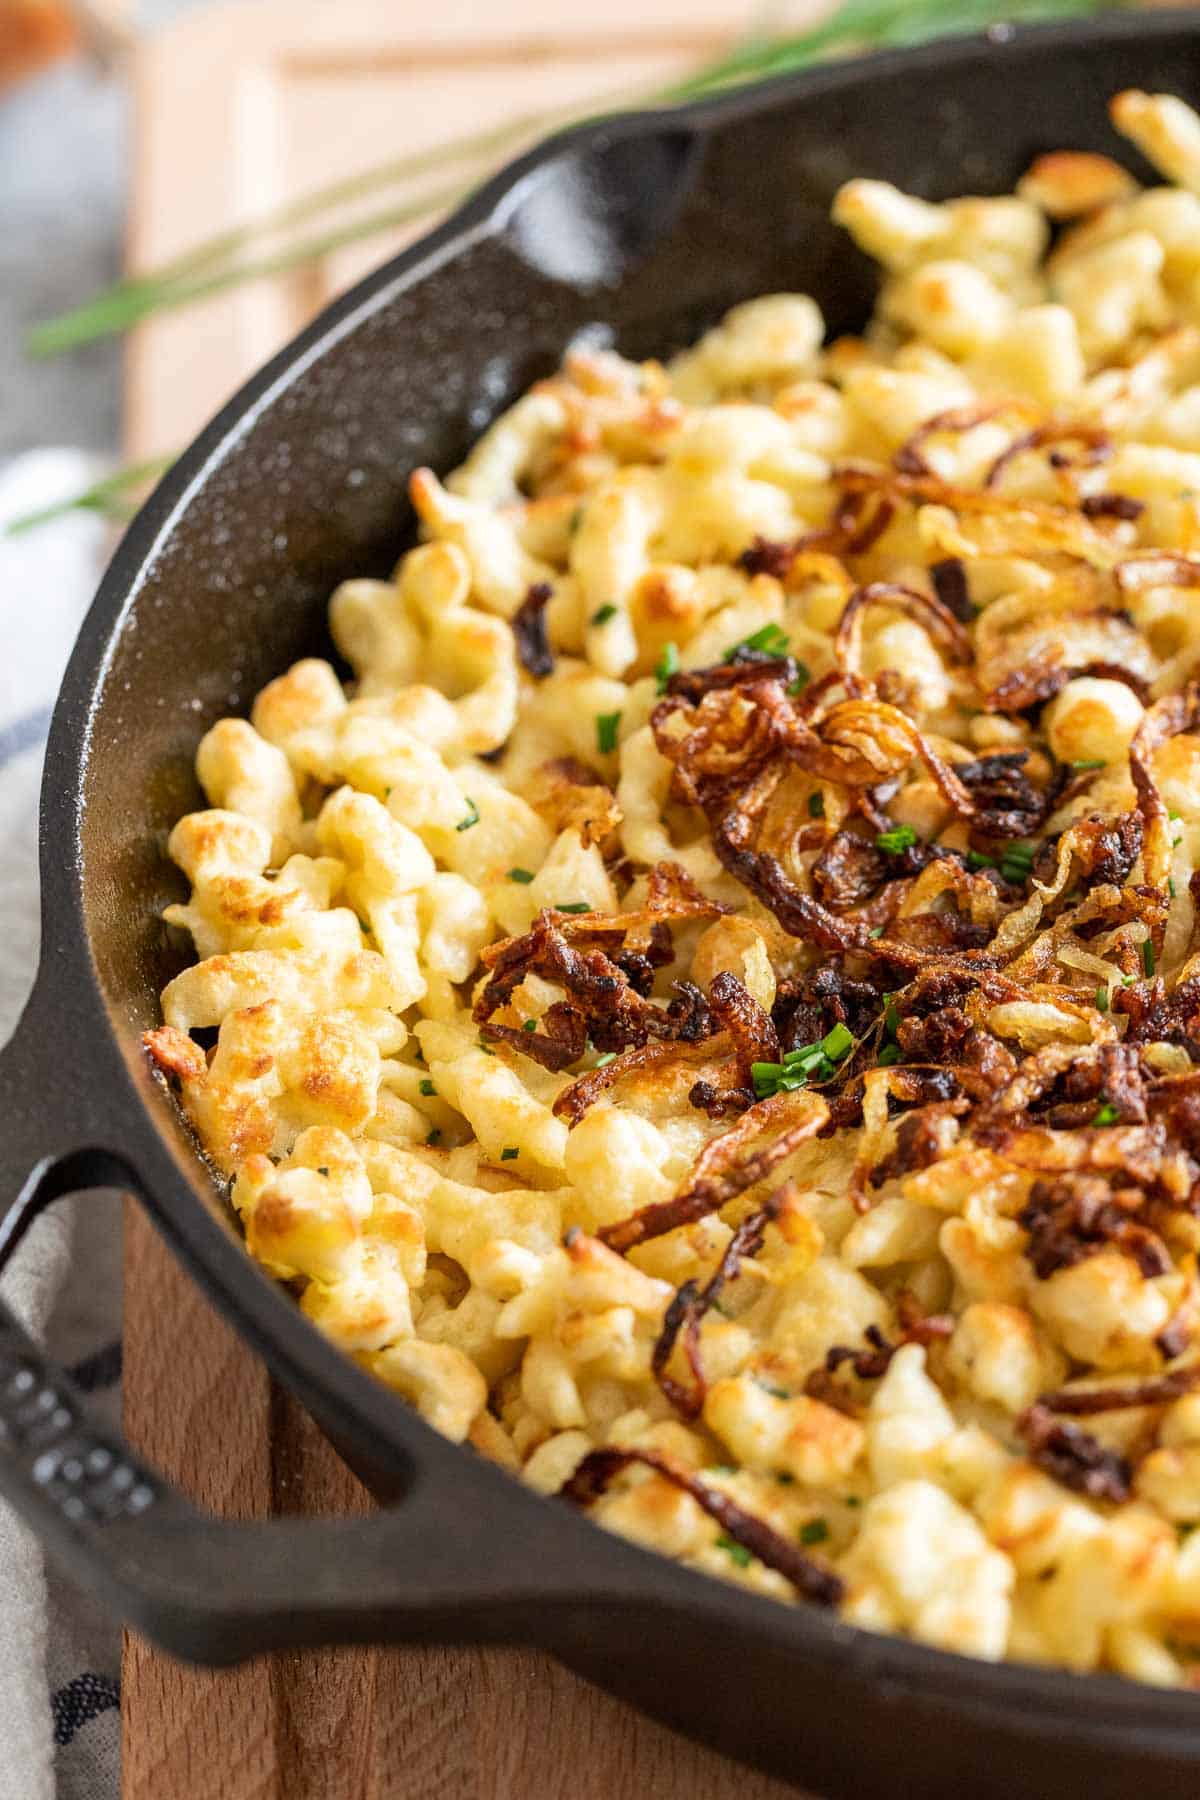 A skillet filled with cheese spaetzle.